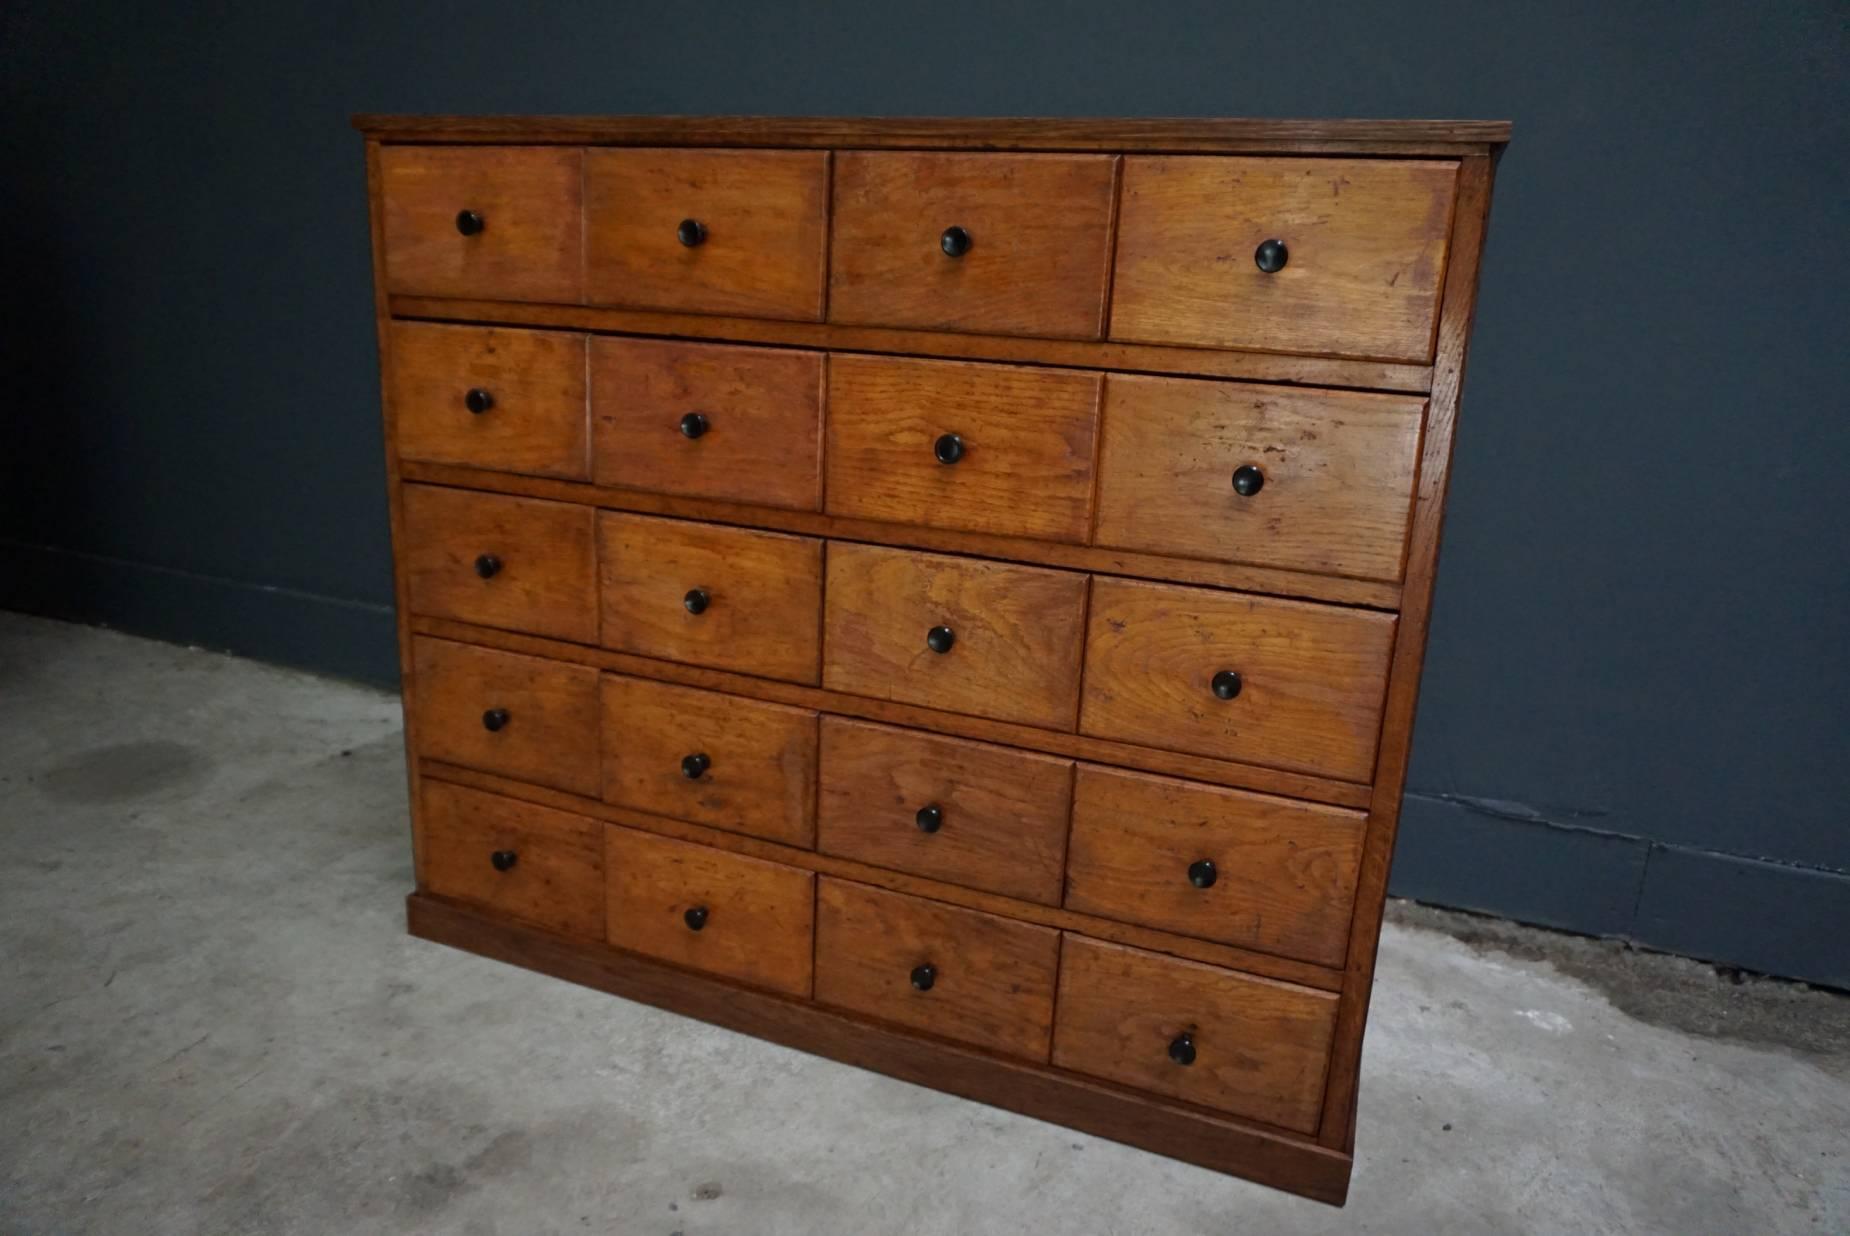 This oak apothecary cabinet was designed and made circa 1930 in the Netherlands. It features 20 drawers and it remains in a very good vintage restored condition. The inside of the drawers measure: 45 x 21.5 x 13 cm.